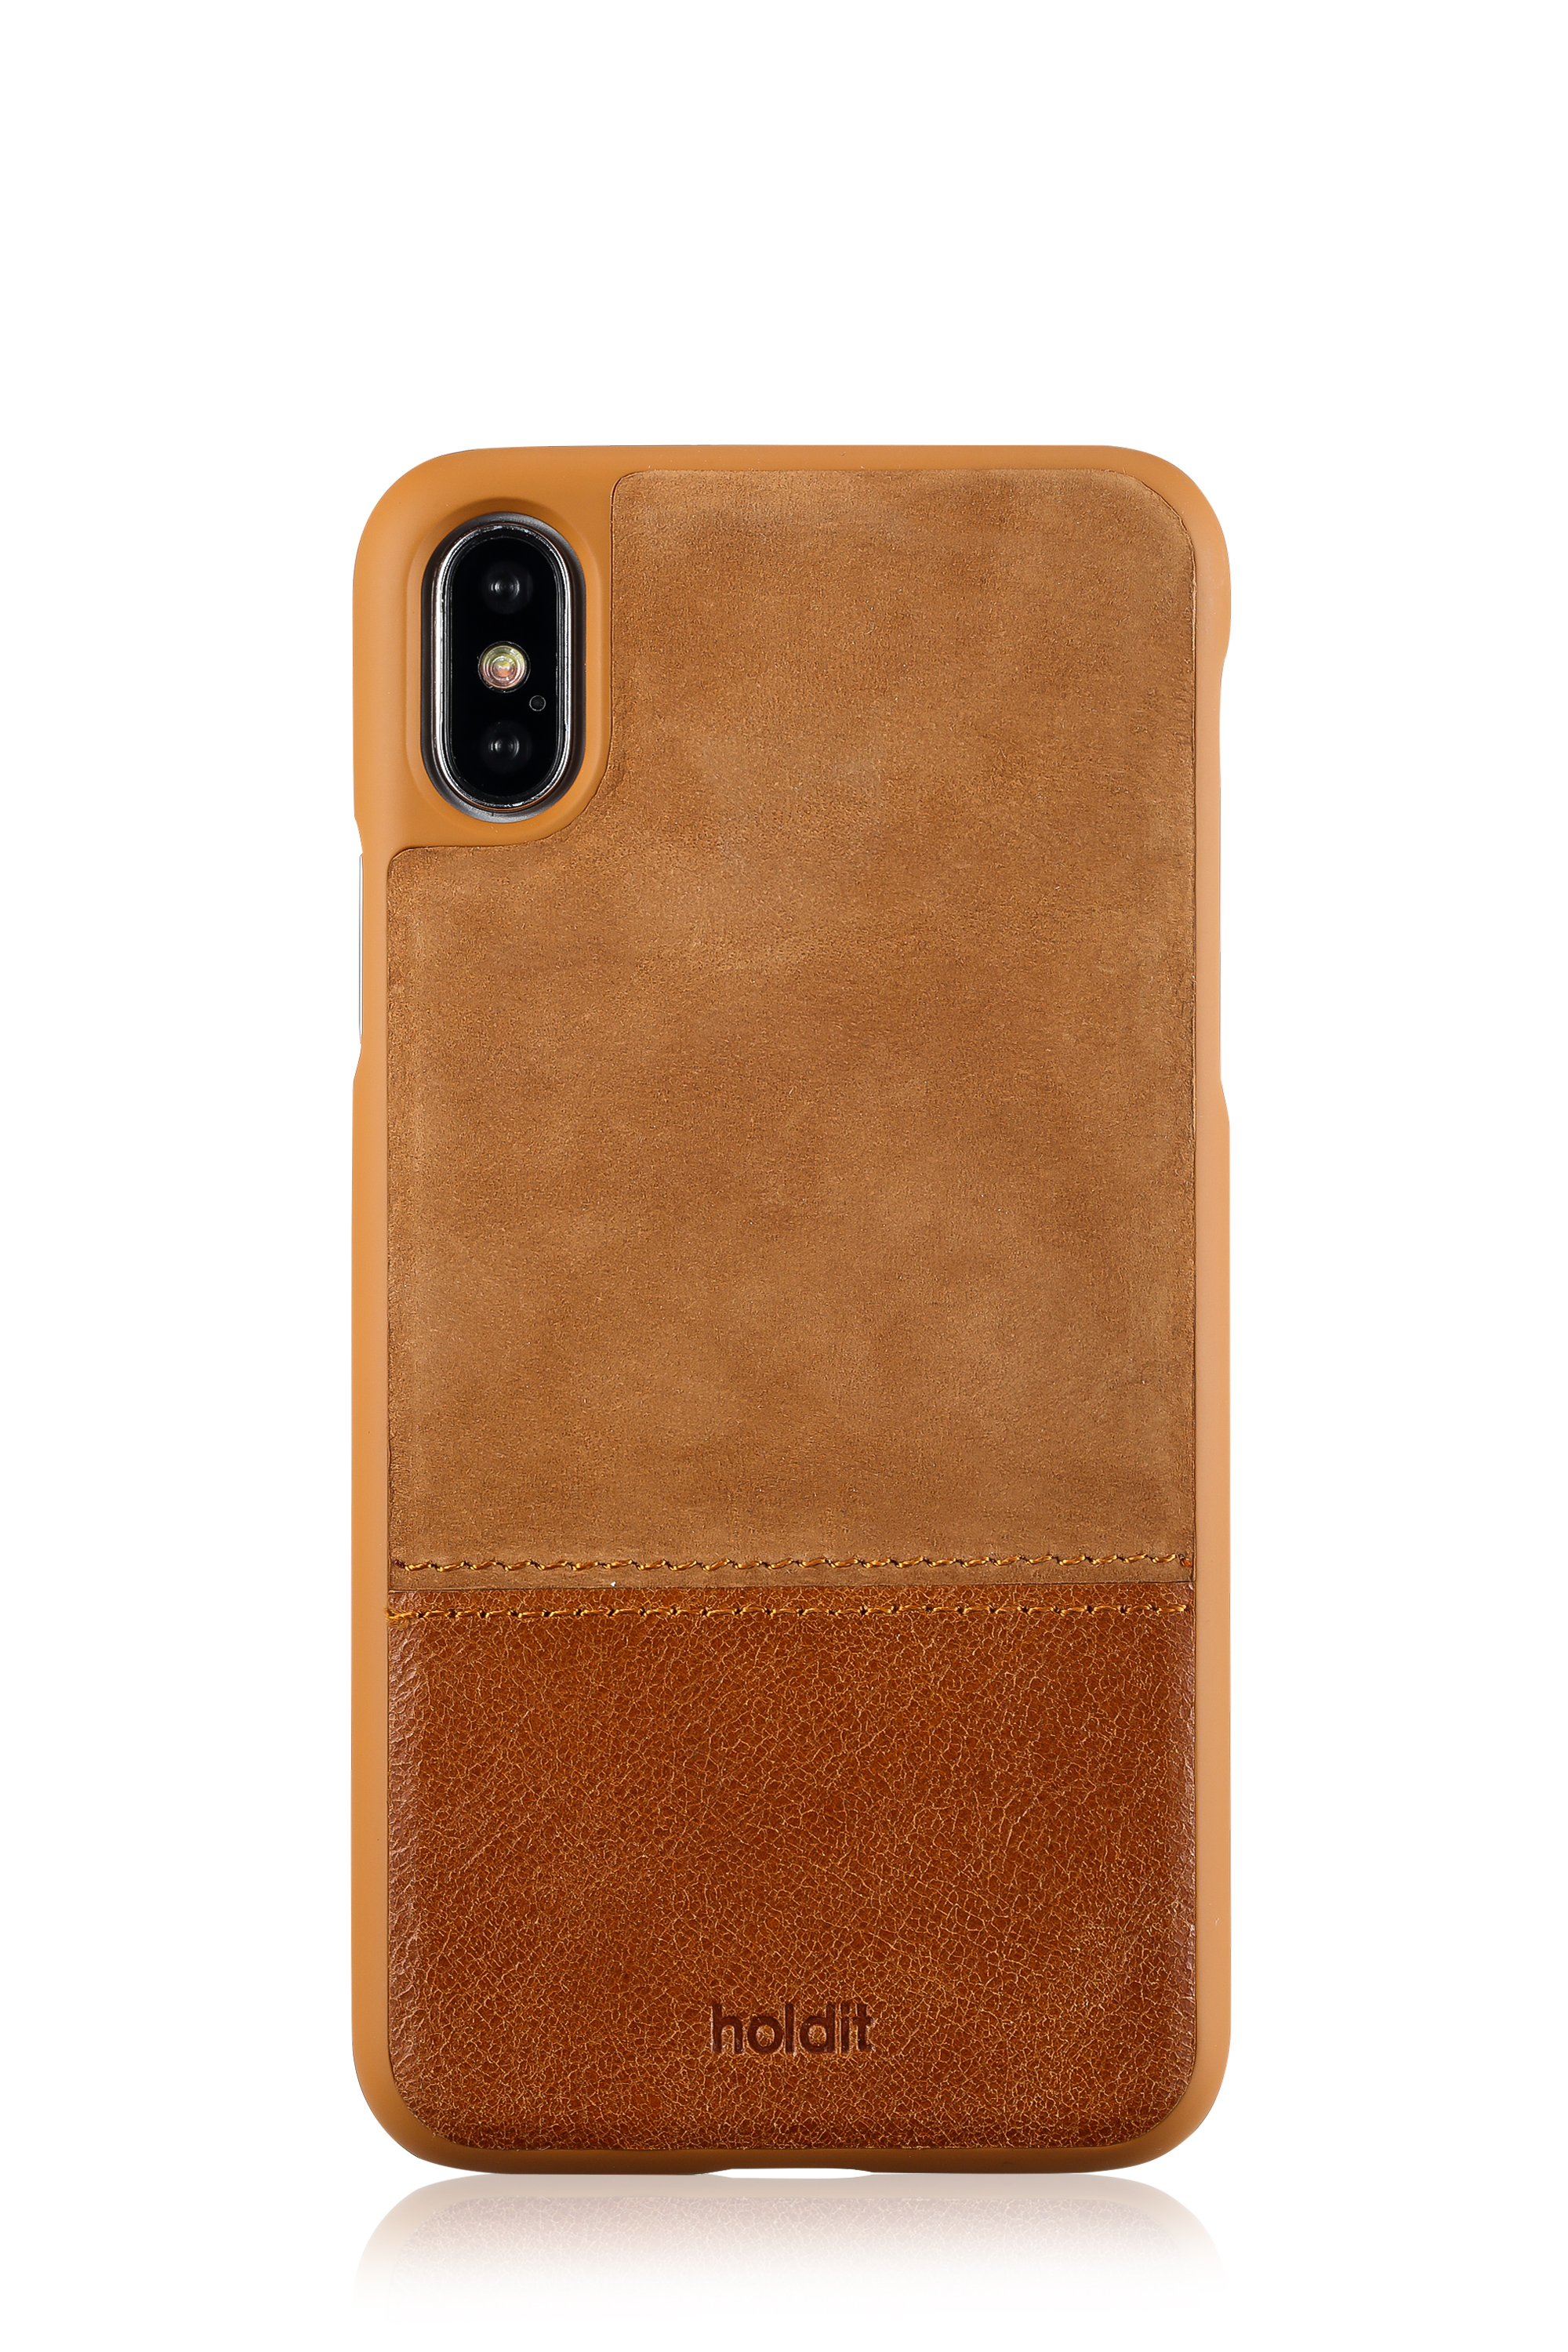 iPhone Xs/X, selected case leather/suede kasa, brown